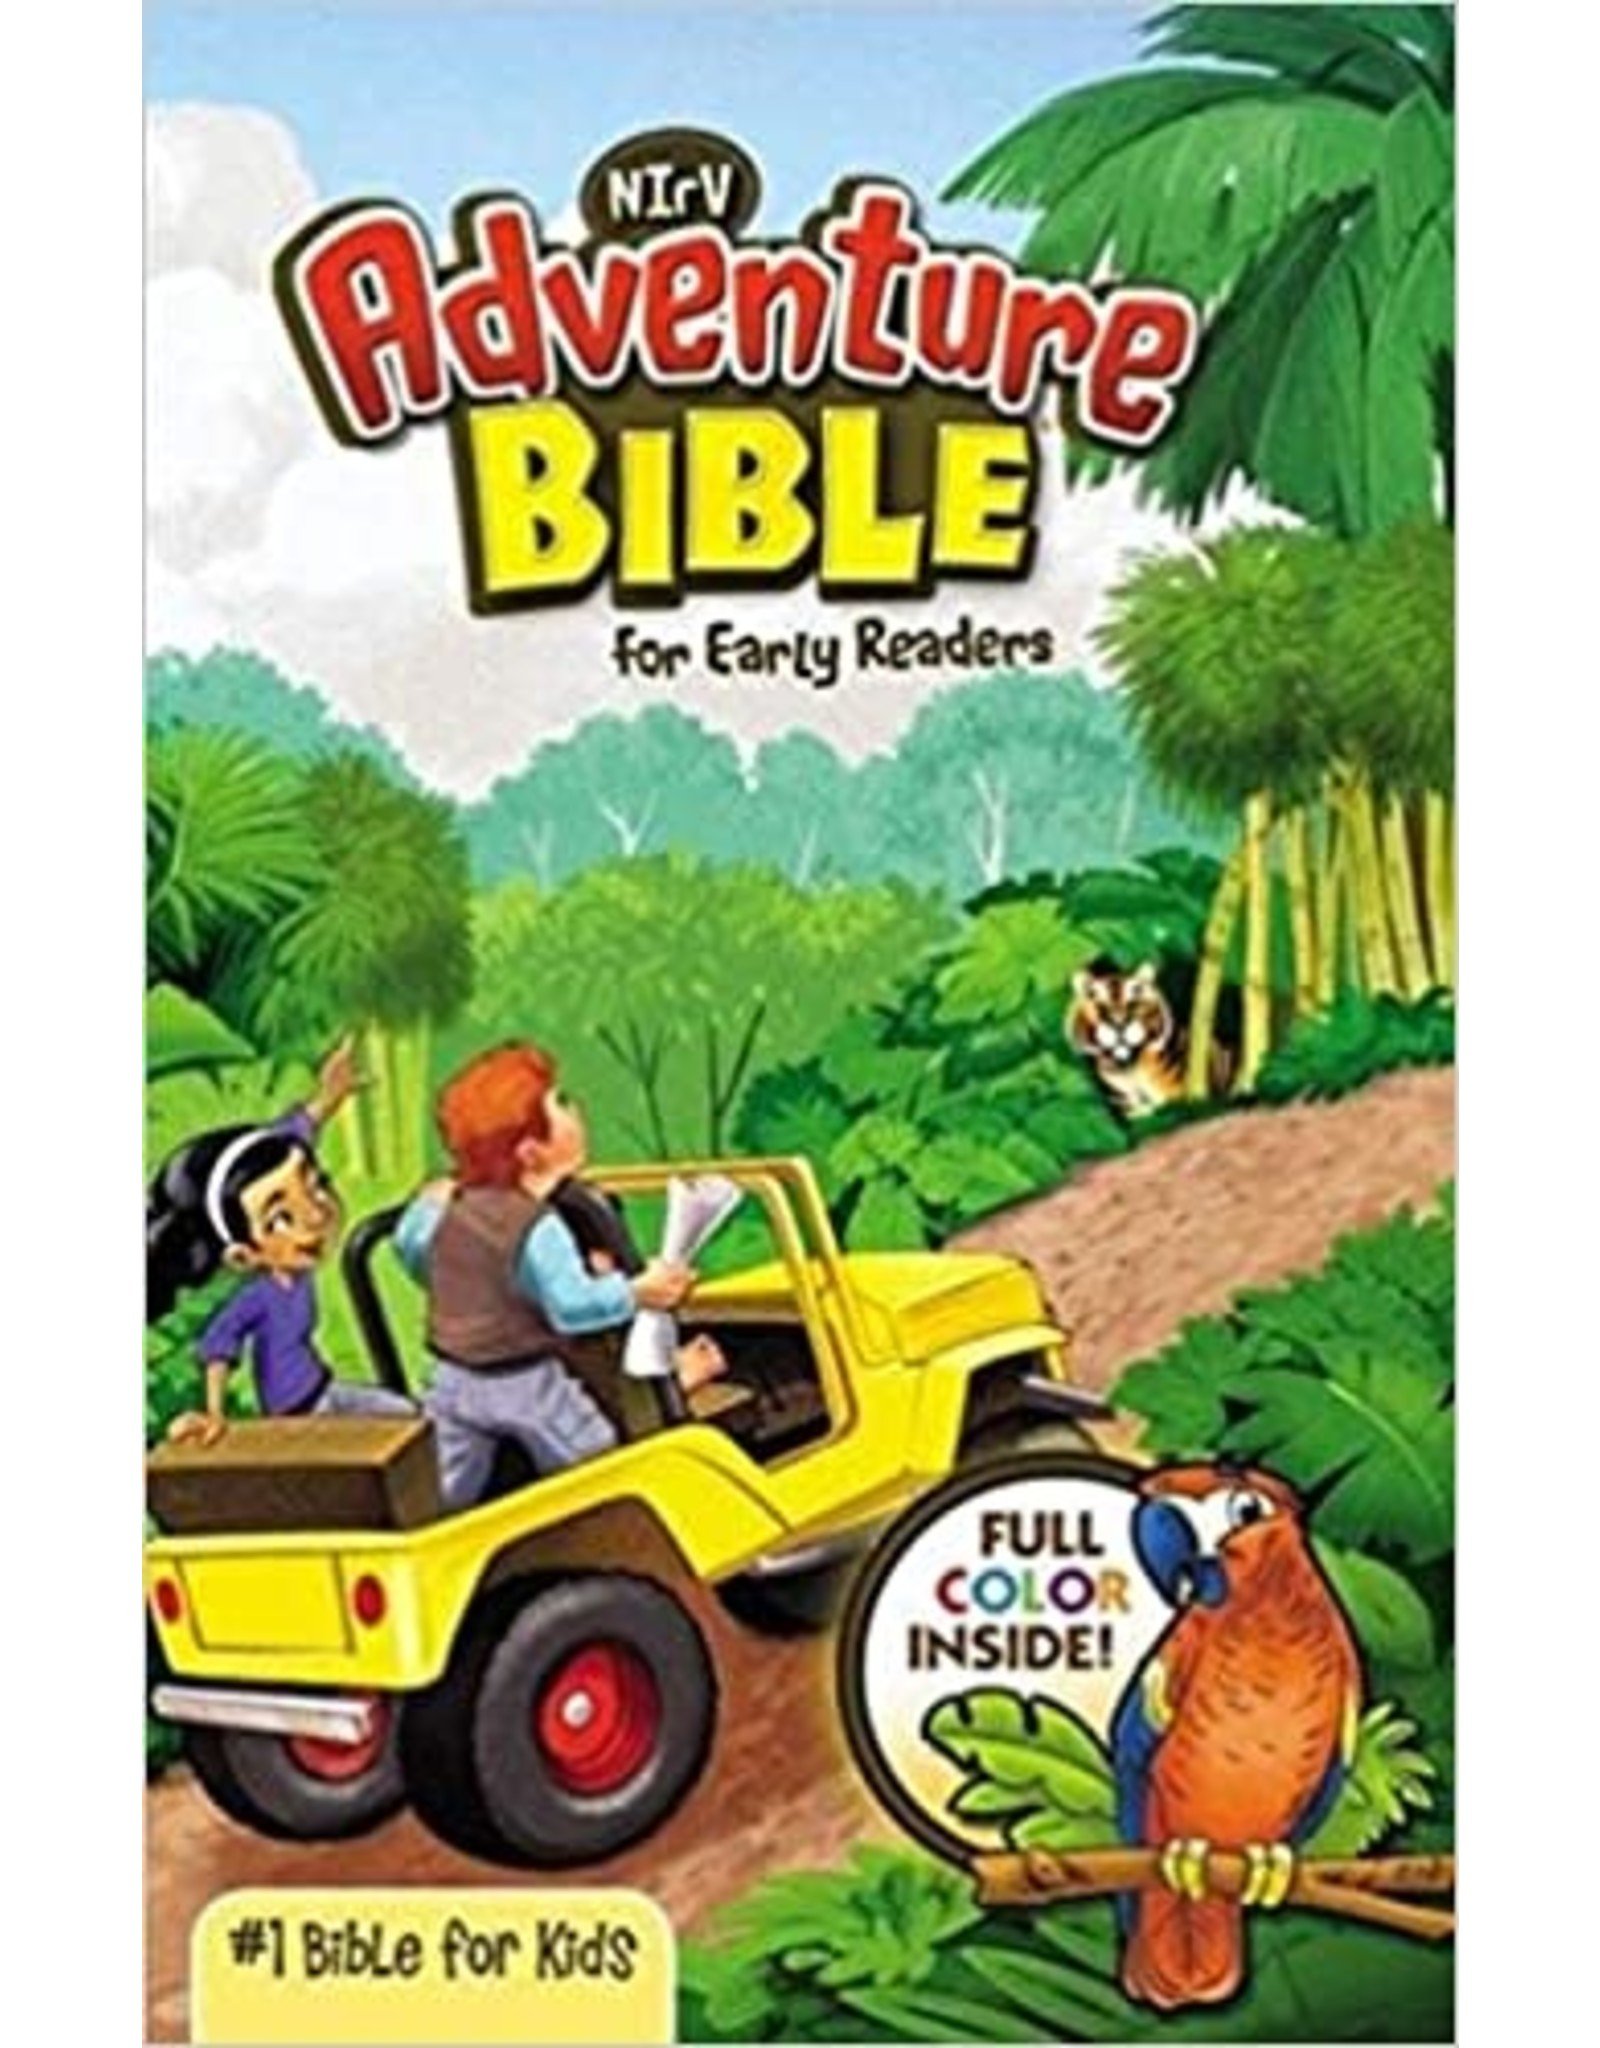 Adventure Bible for Early Readers, NIRV (New International Reader's Version)